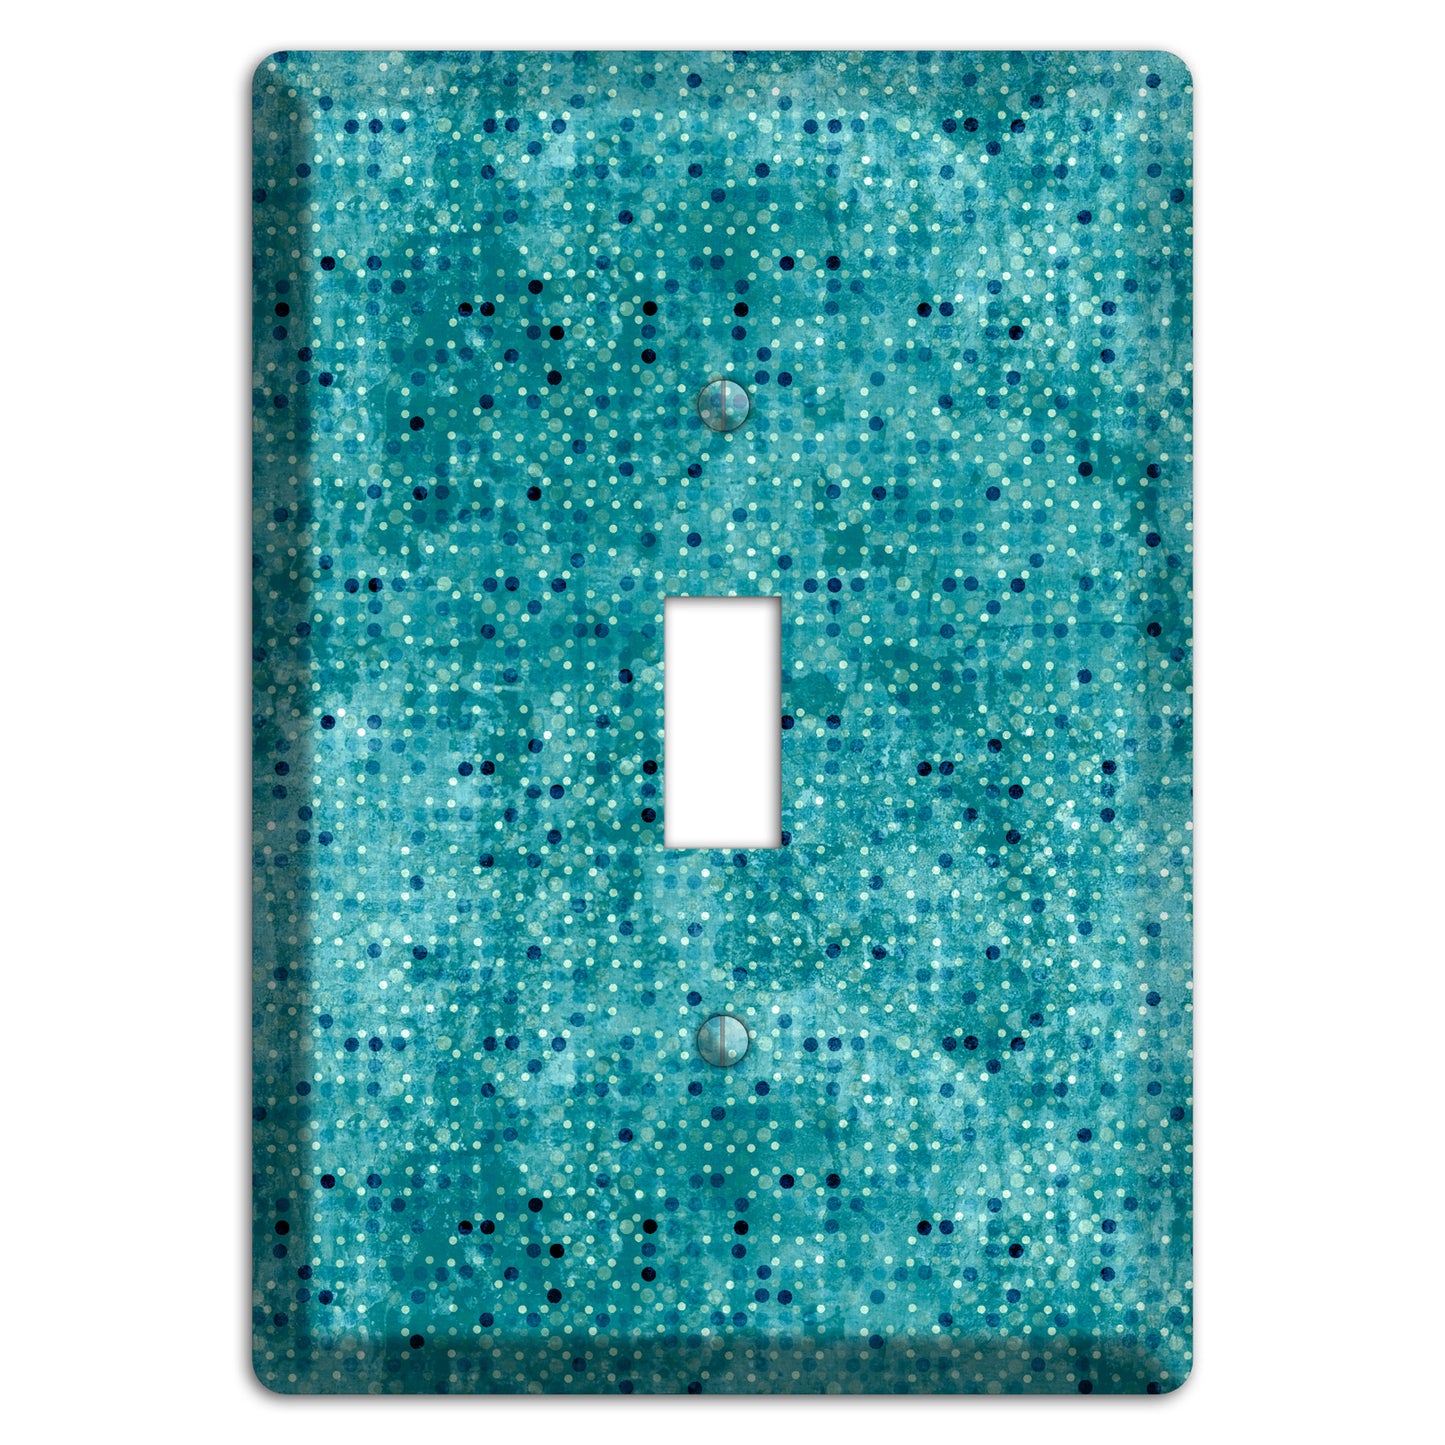 Turquoise Grunge Small Tile Cover Plates